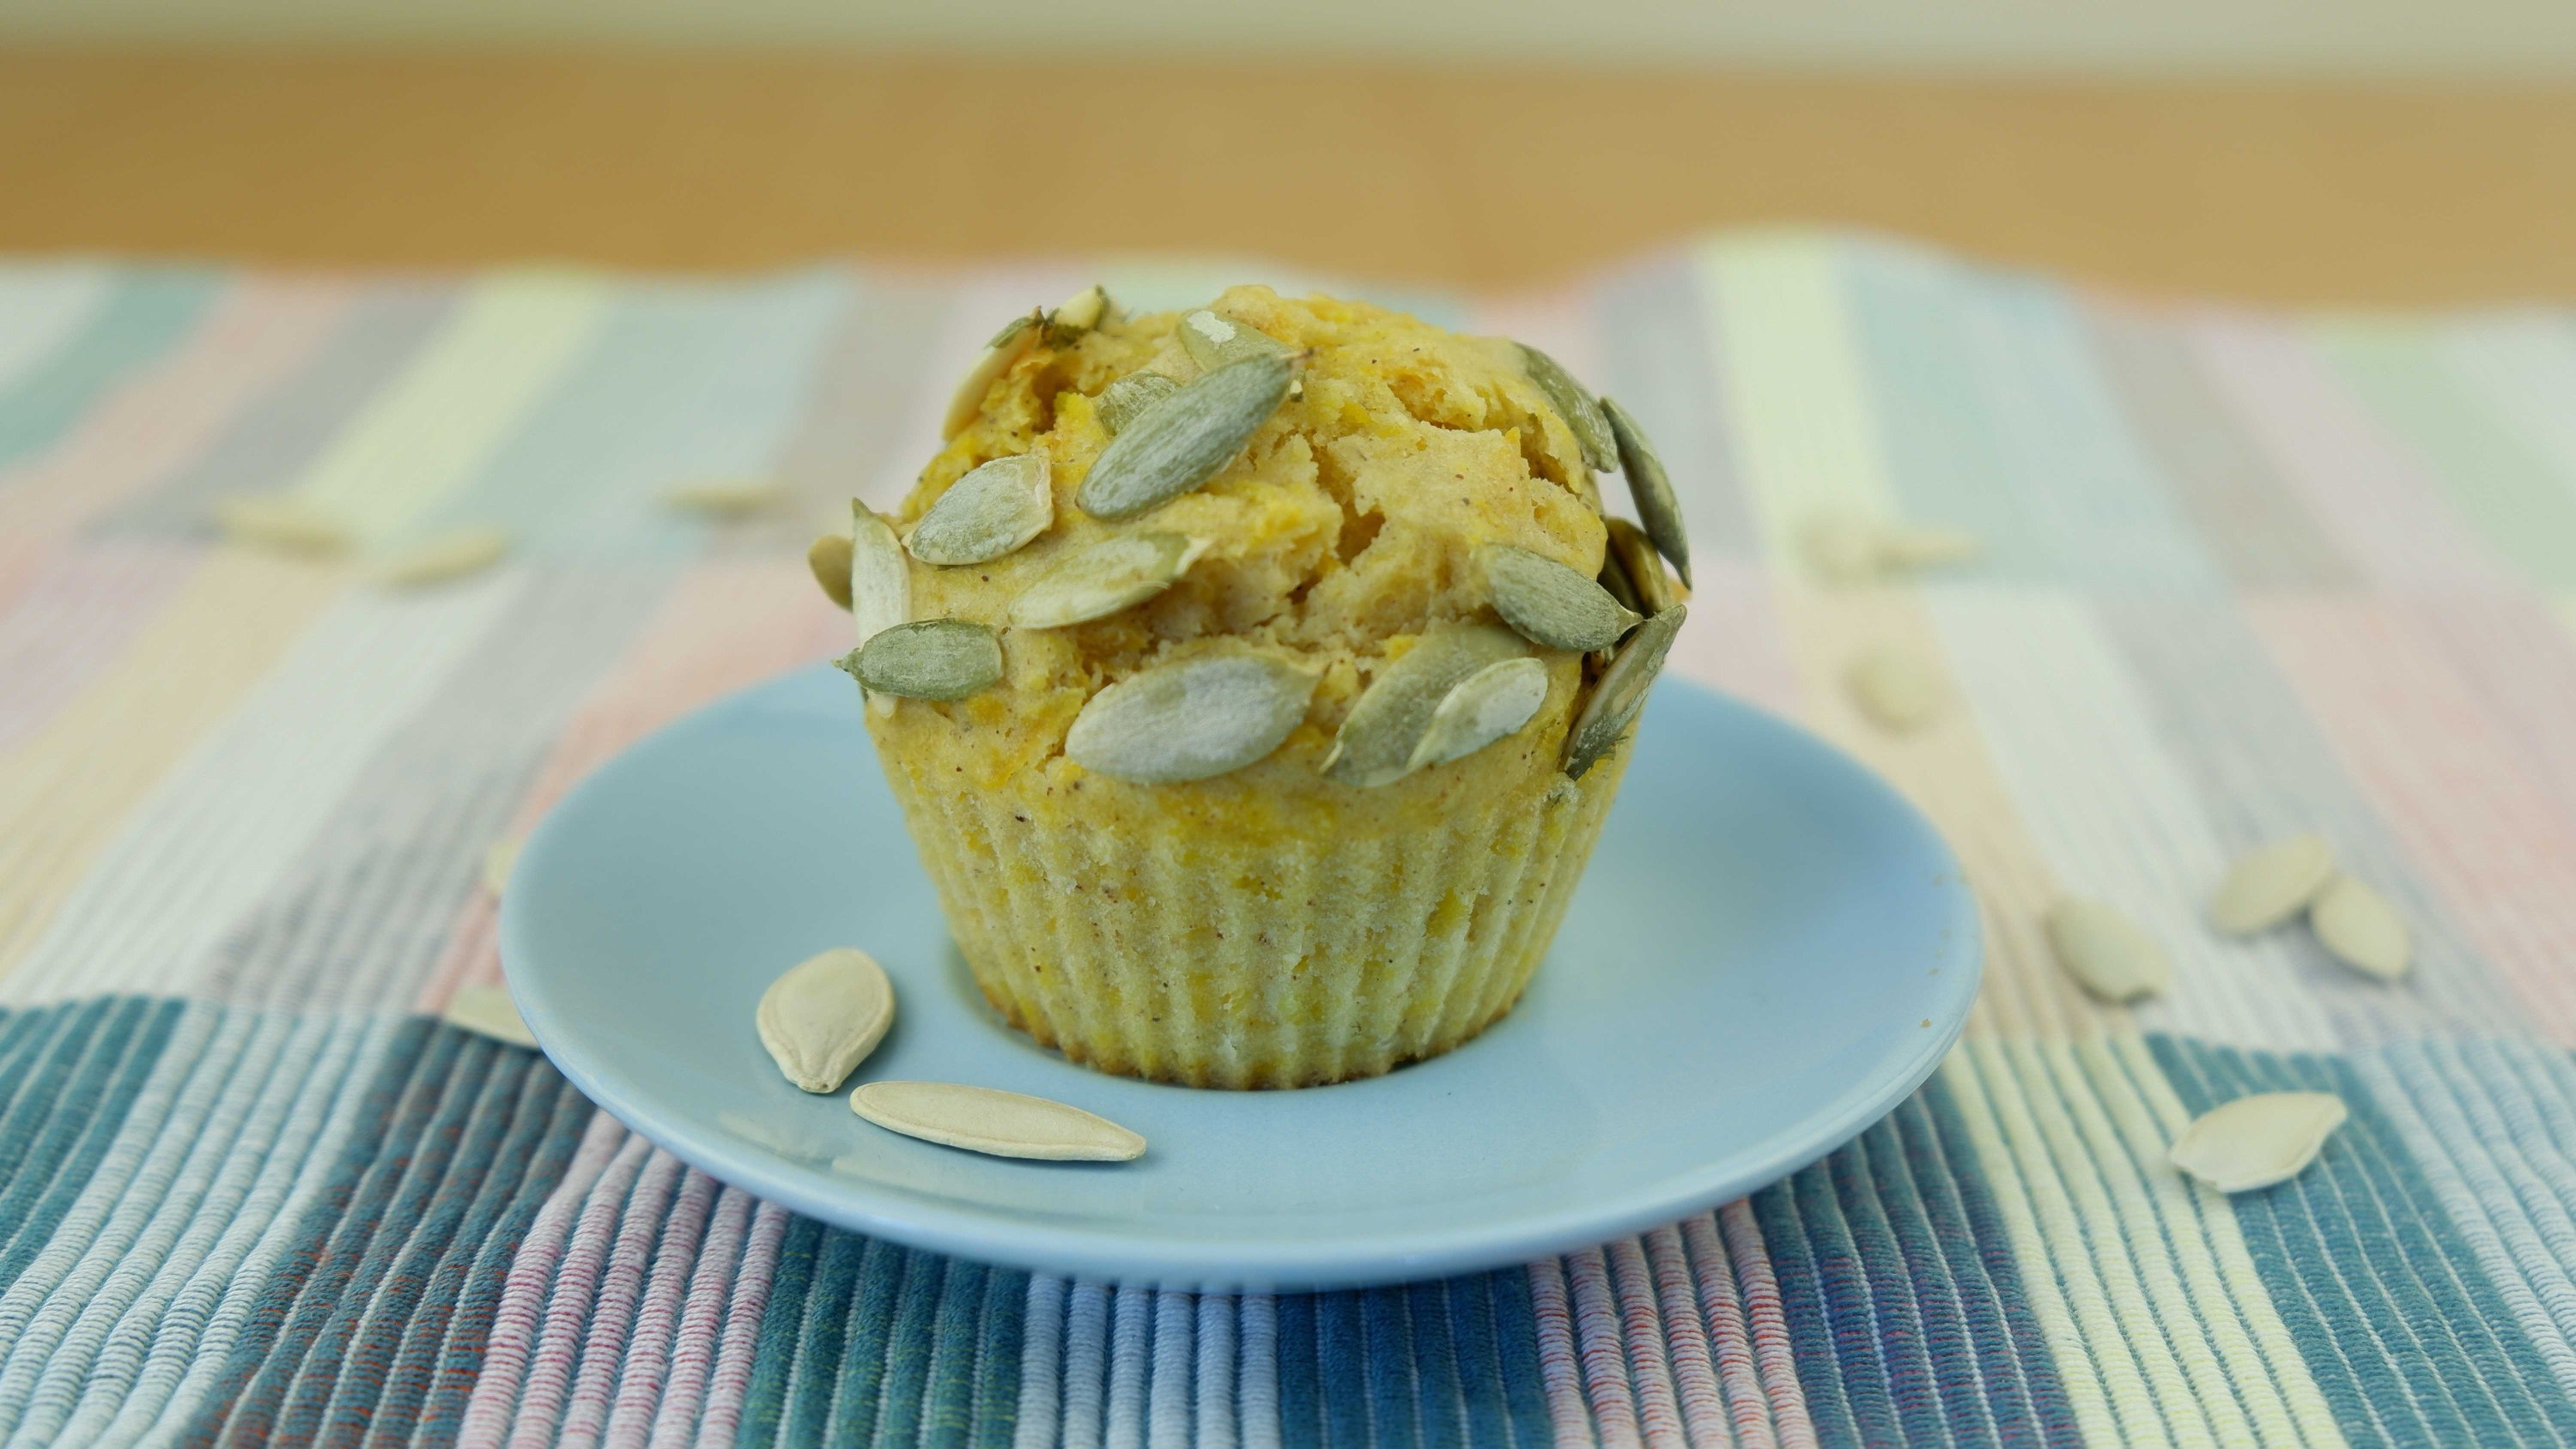 Pumpkin seeds are a great topping for pumpkin muffins. (Photo by Ayla Coşkun)